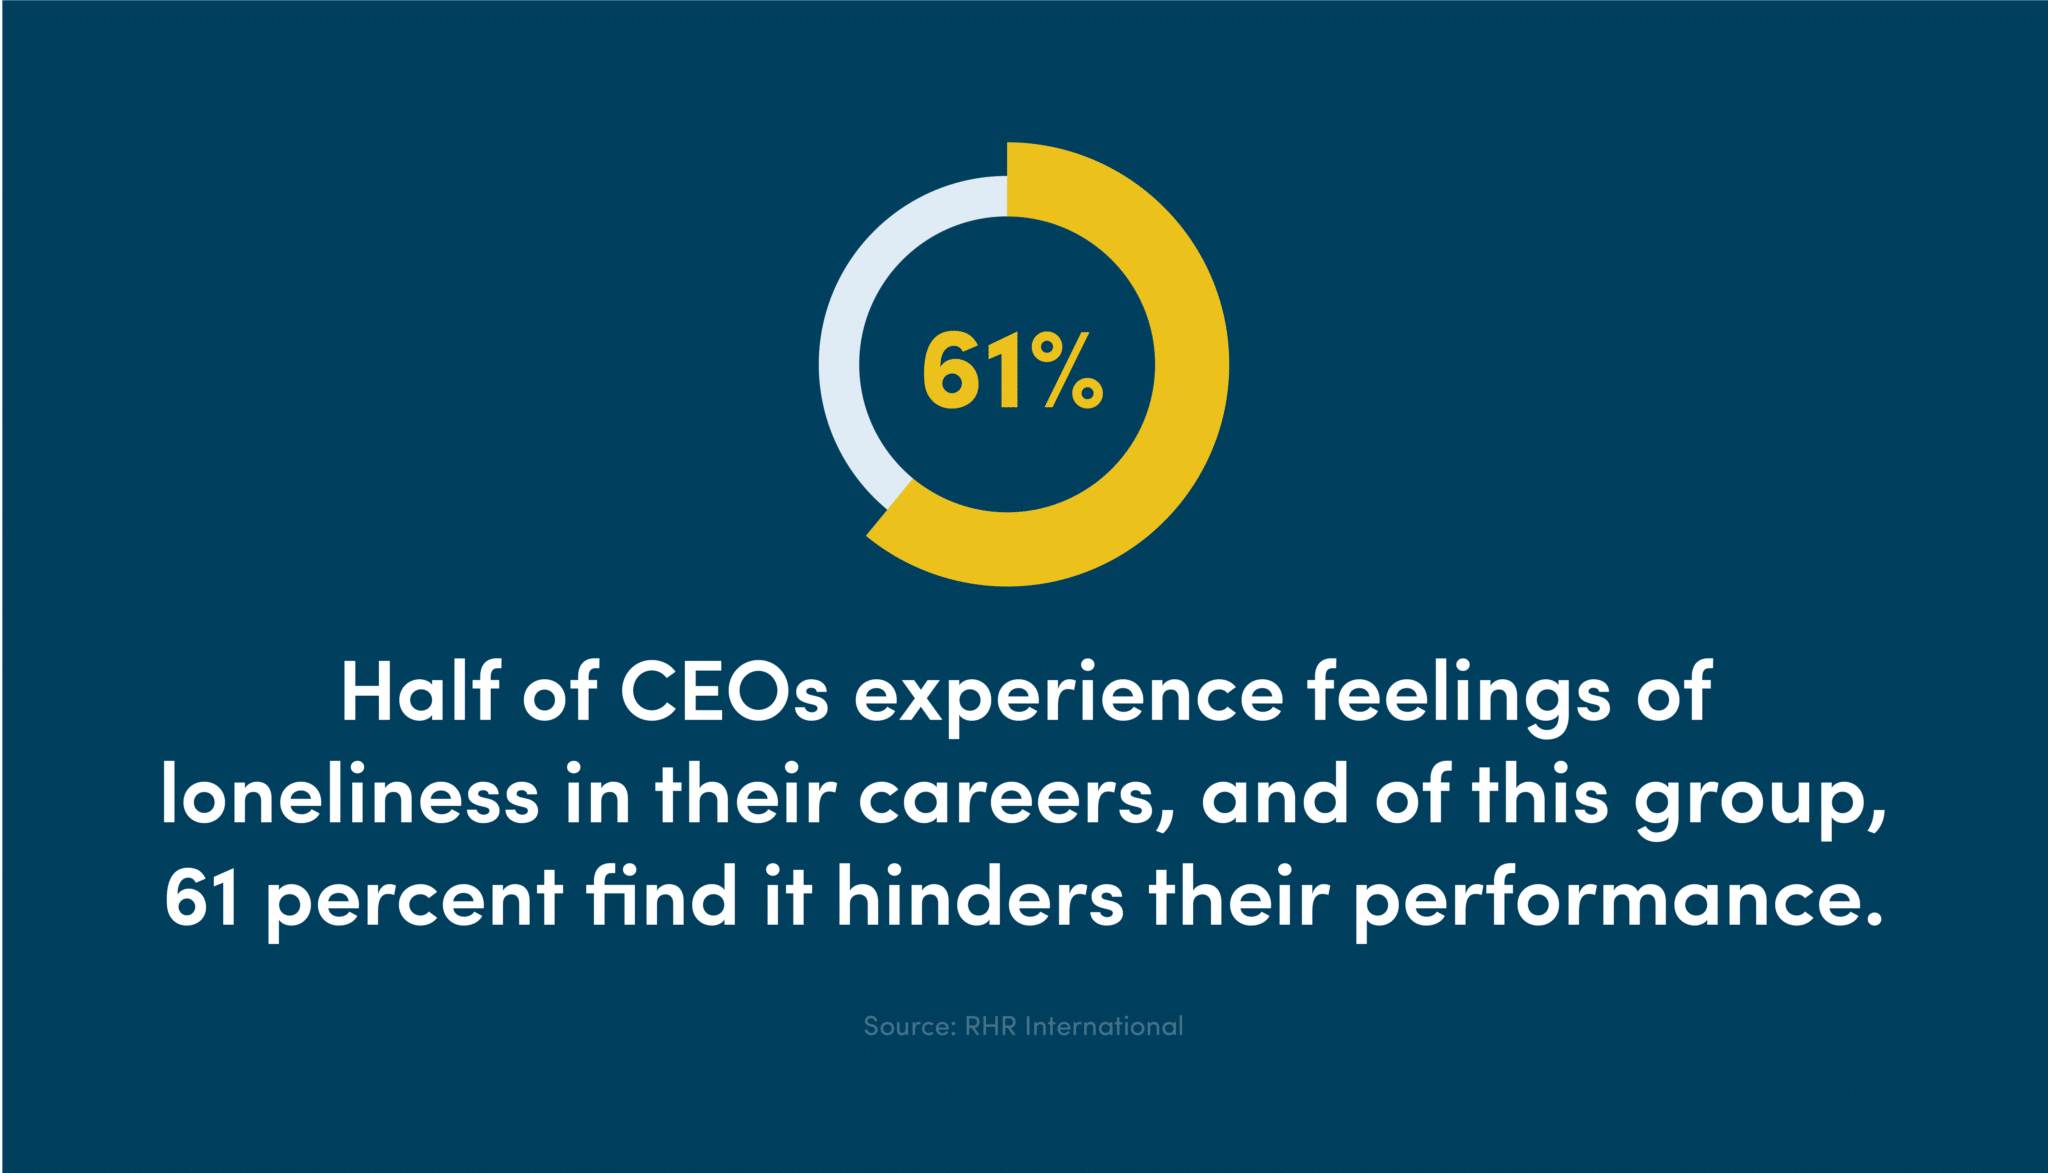 Half of CEOs experience feelings of loneliness in their careers, and of this group, 61 percent find it hinders their performance.